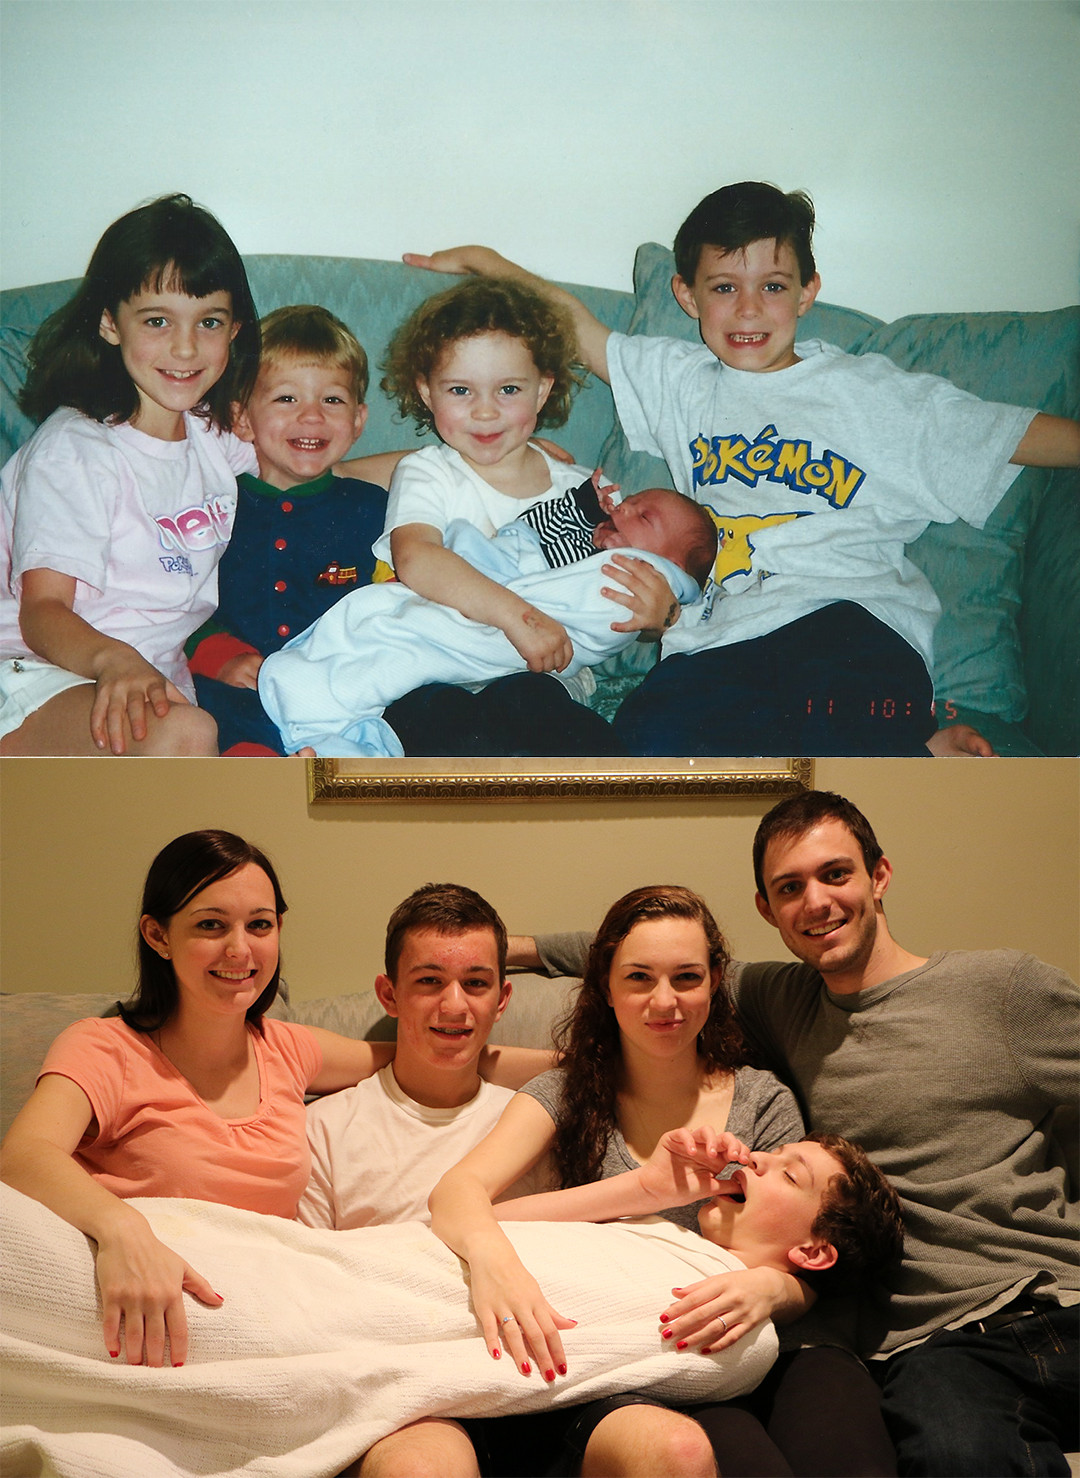 Five Adult Siblings Recreate Their Childhood Photos For Their Parents